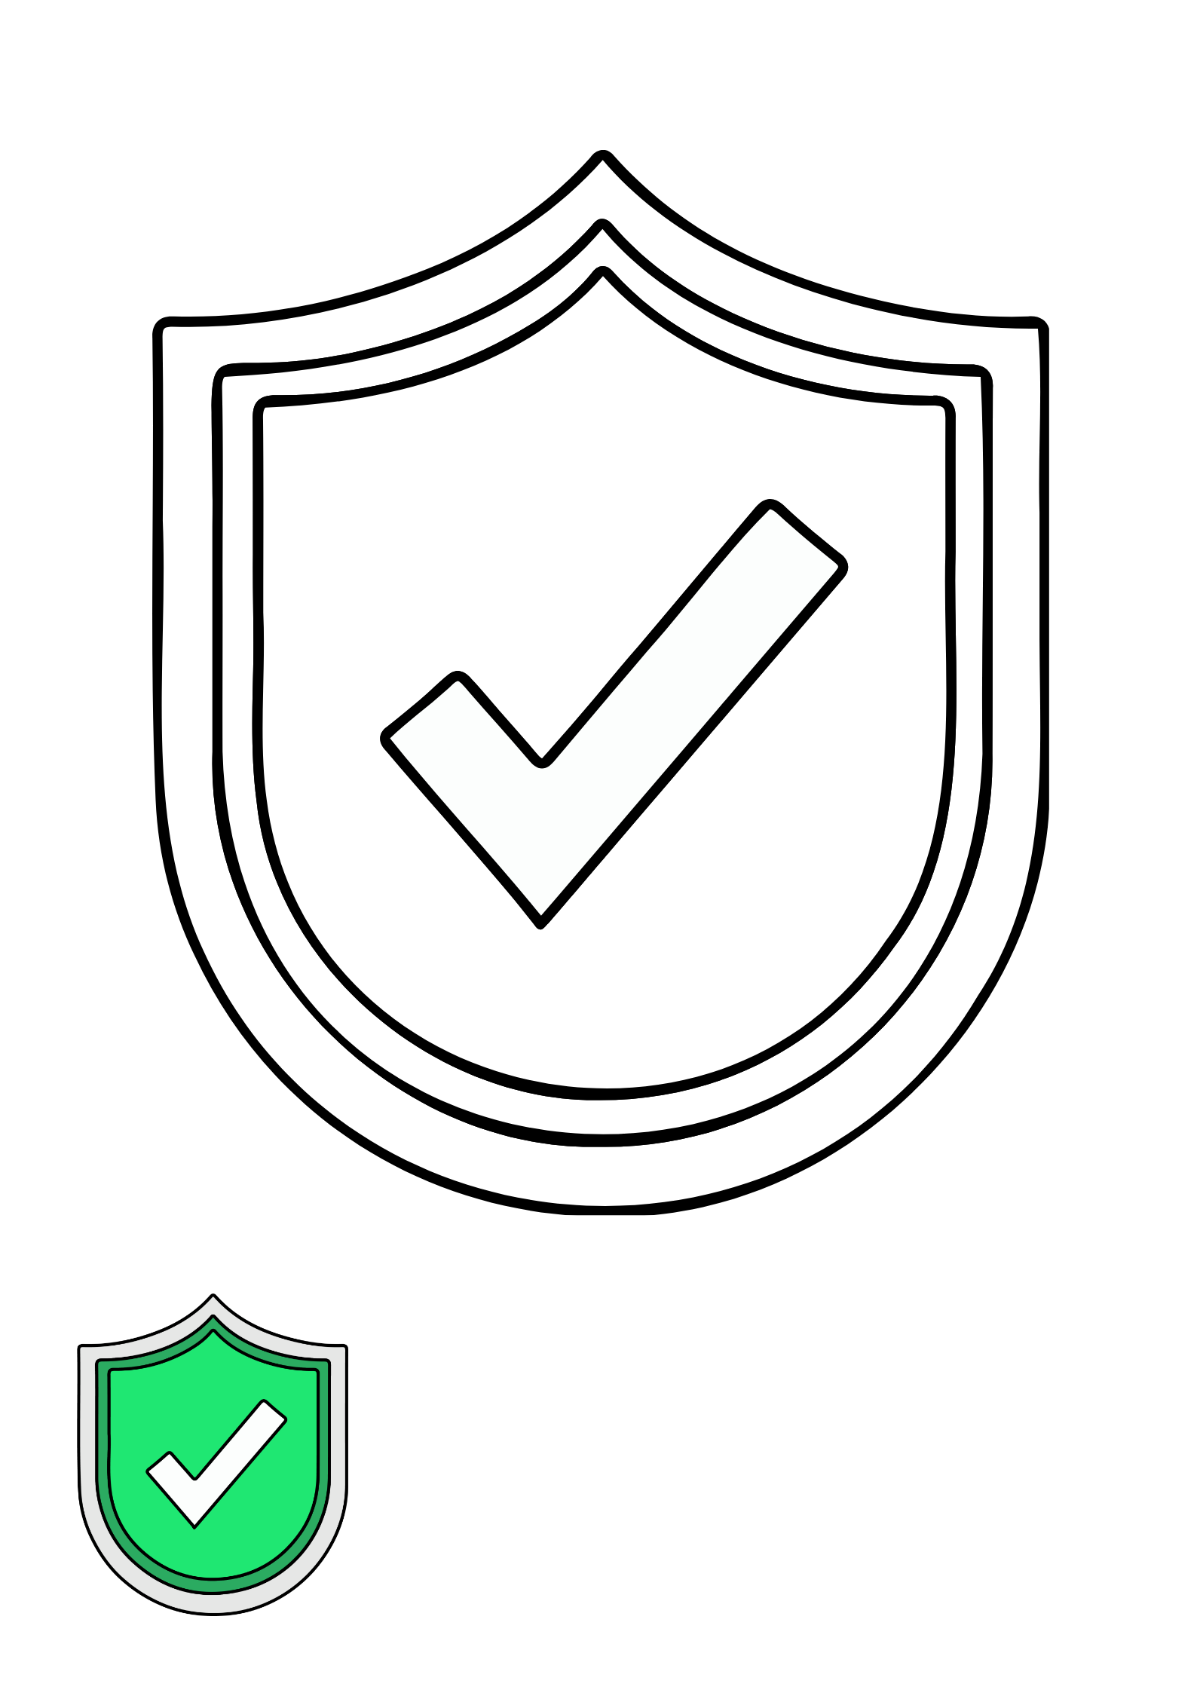 Shield Check Mark coloring page Template